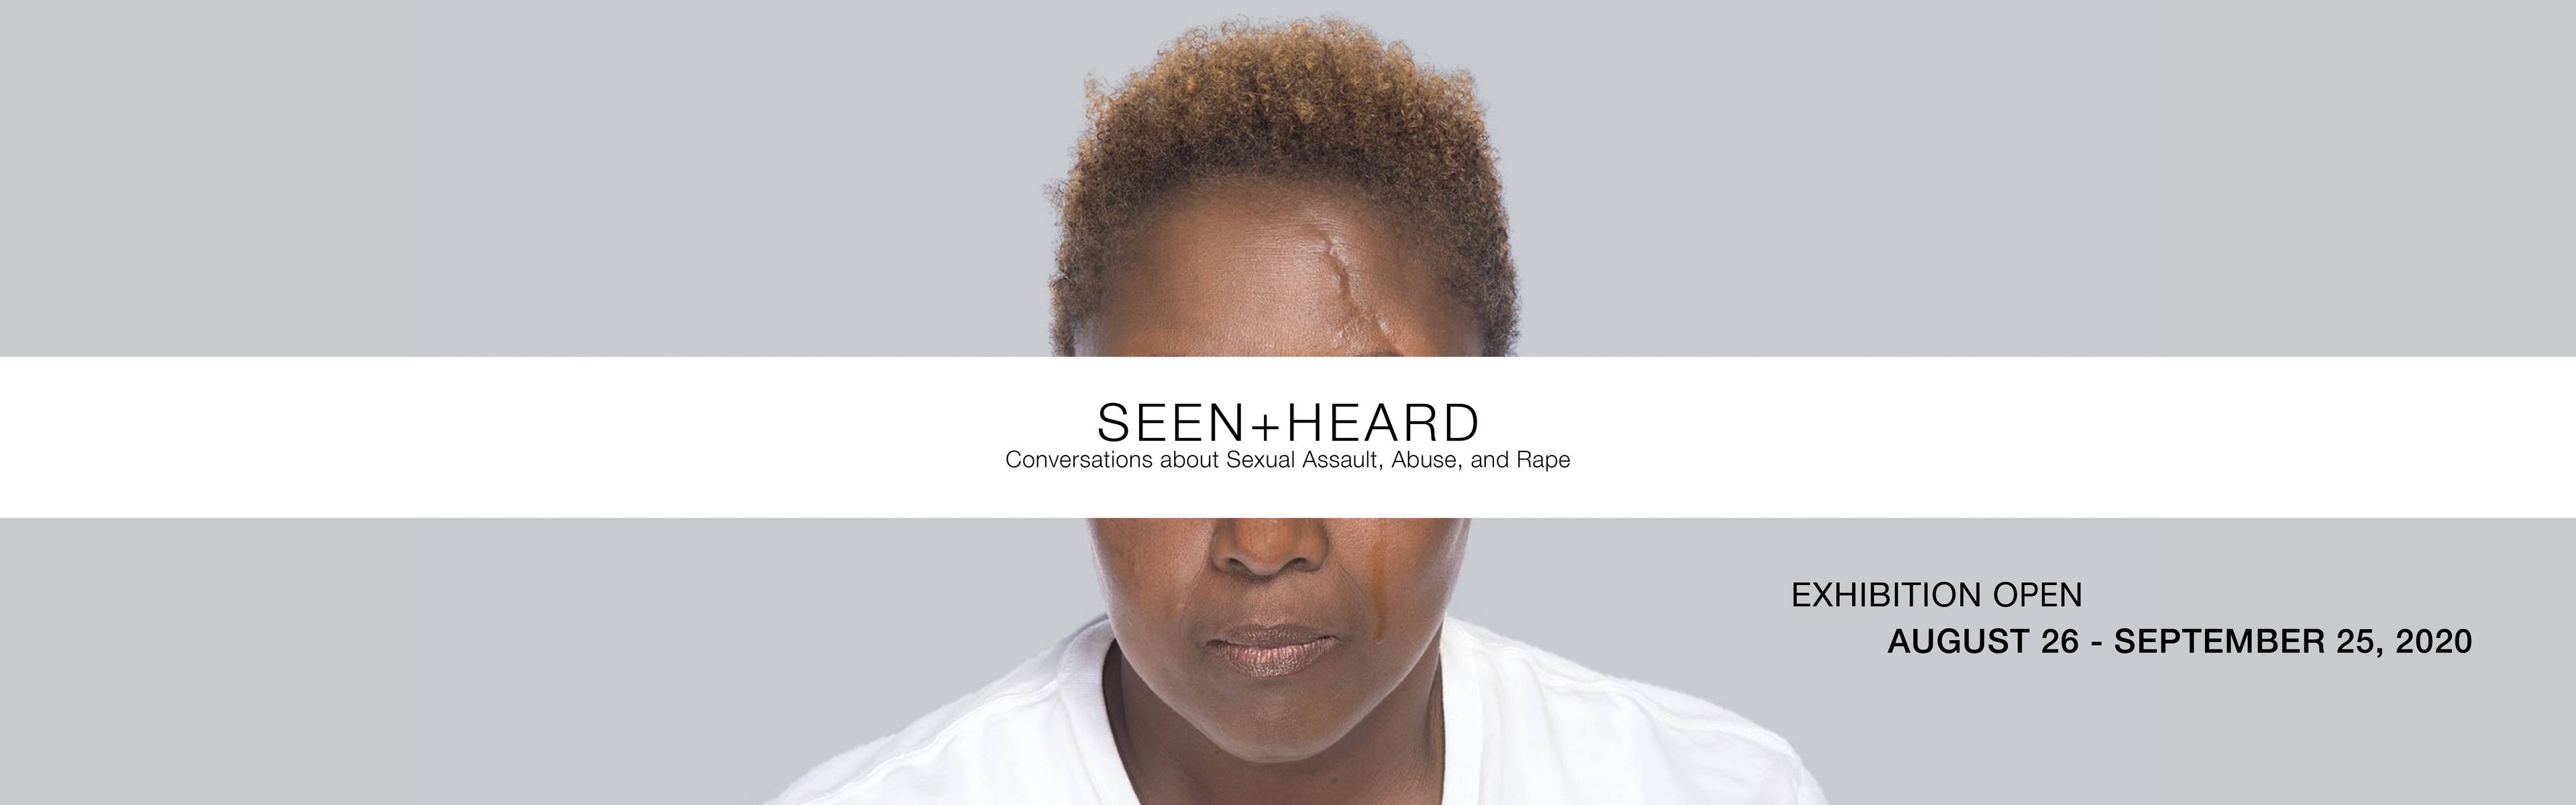 Image of Seen + Heard banner with subtitle "Conversations about Sexual Assault, Abuse, and Rape"